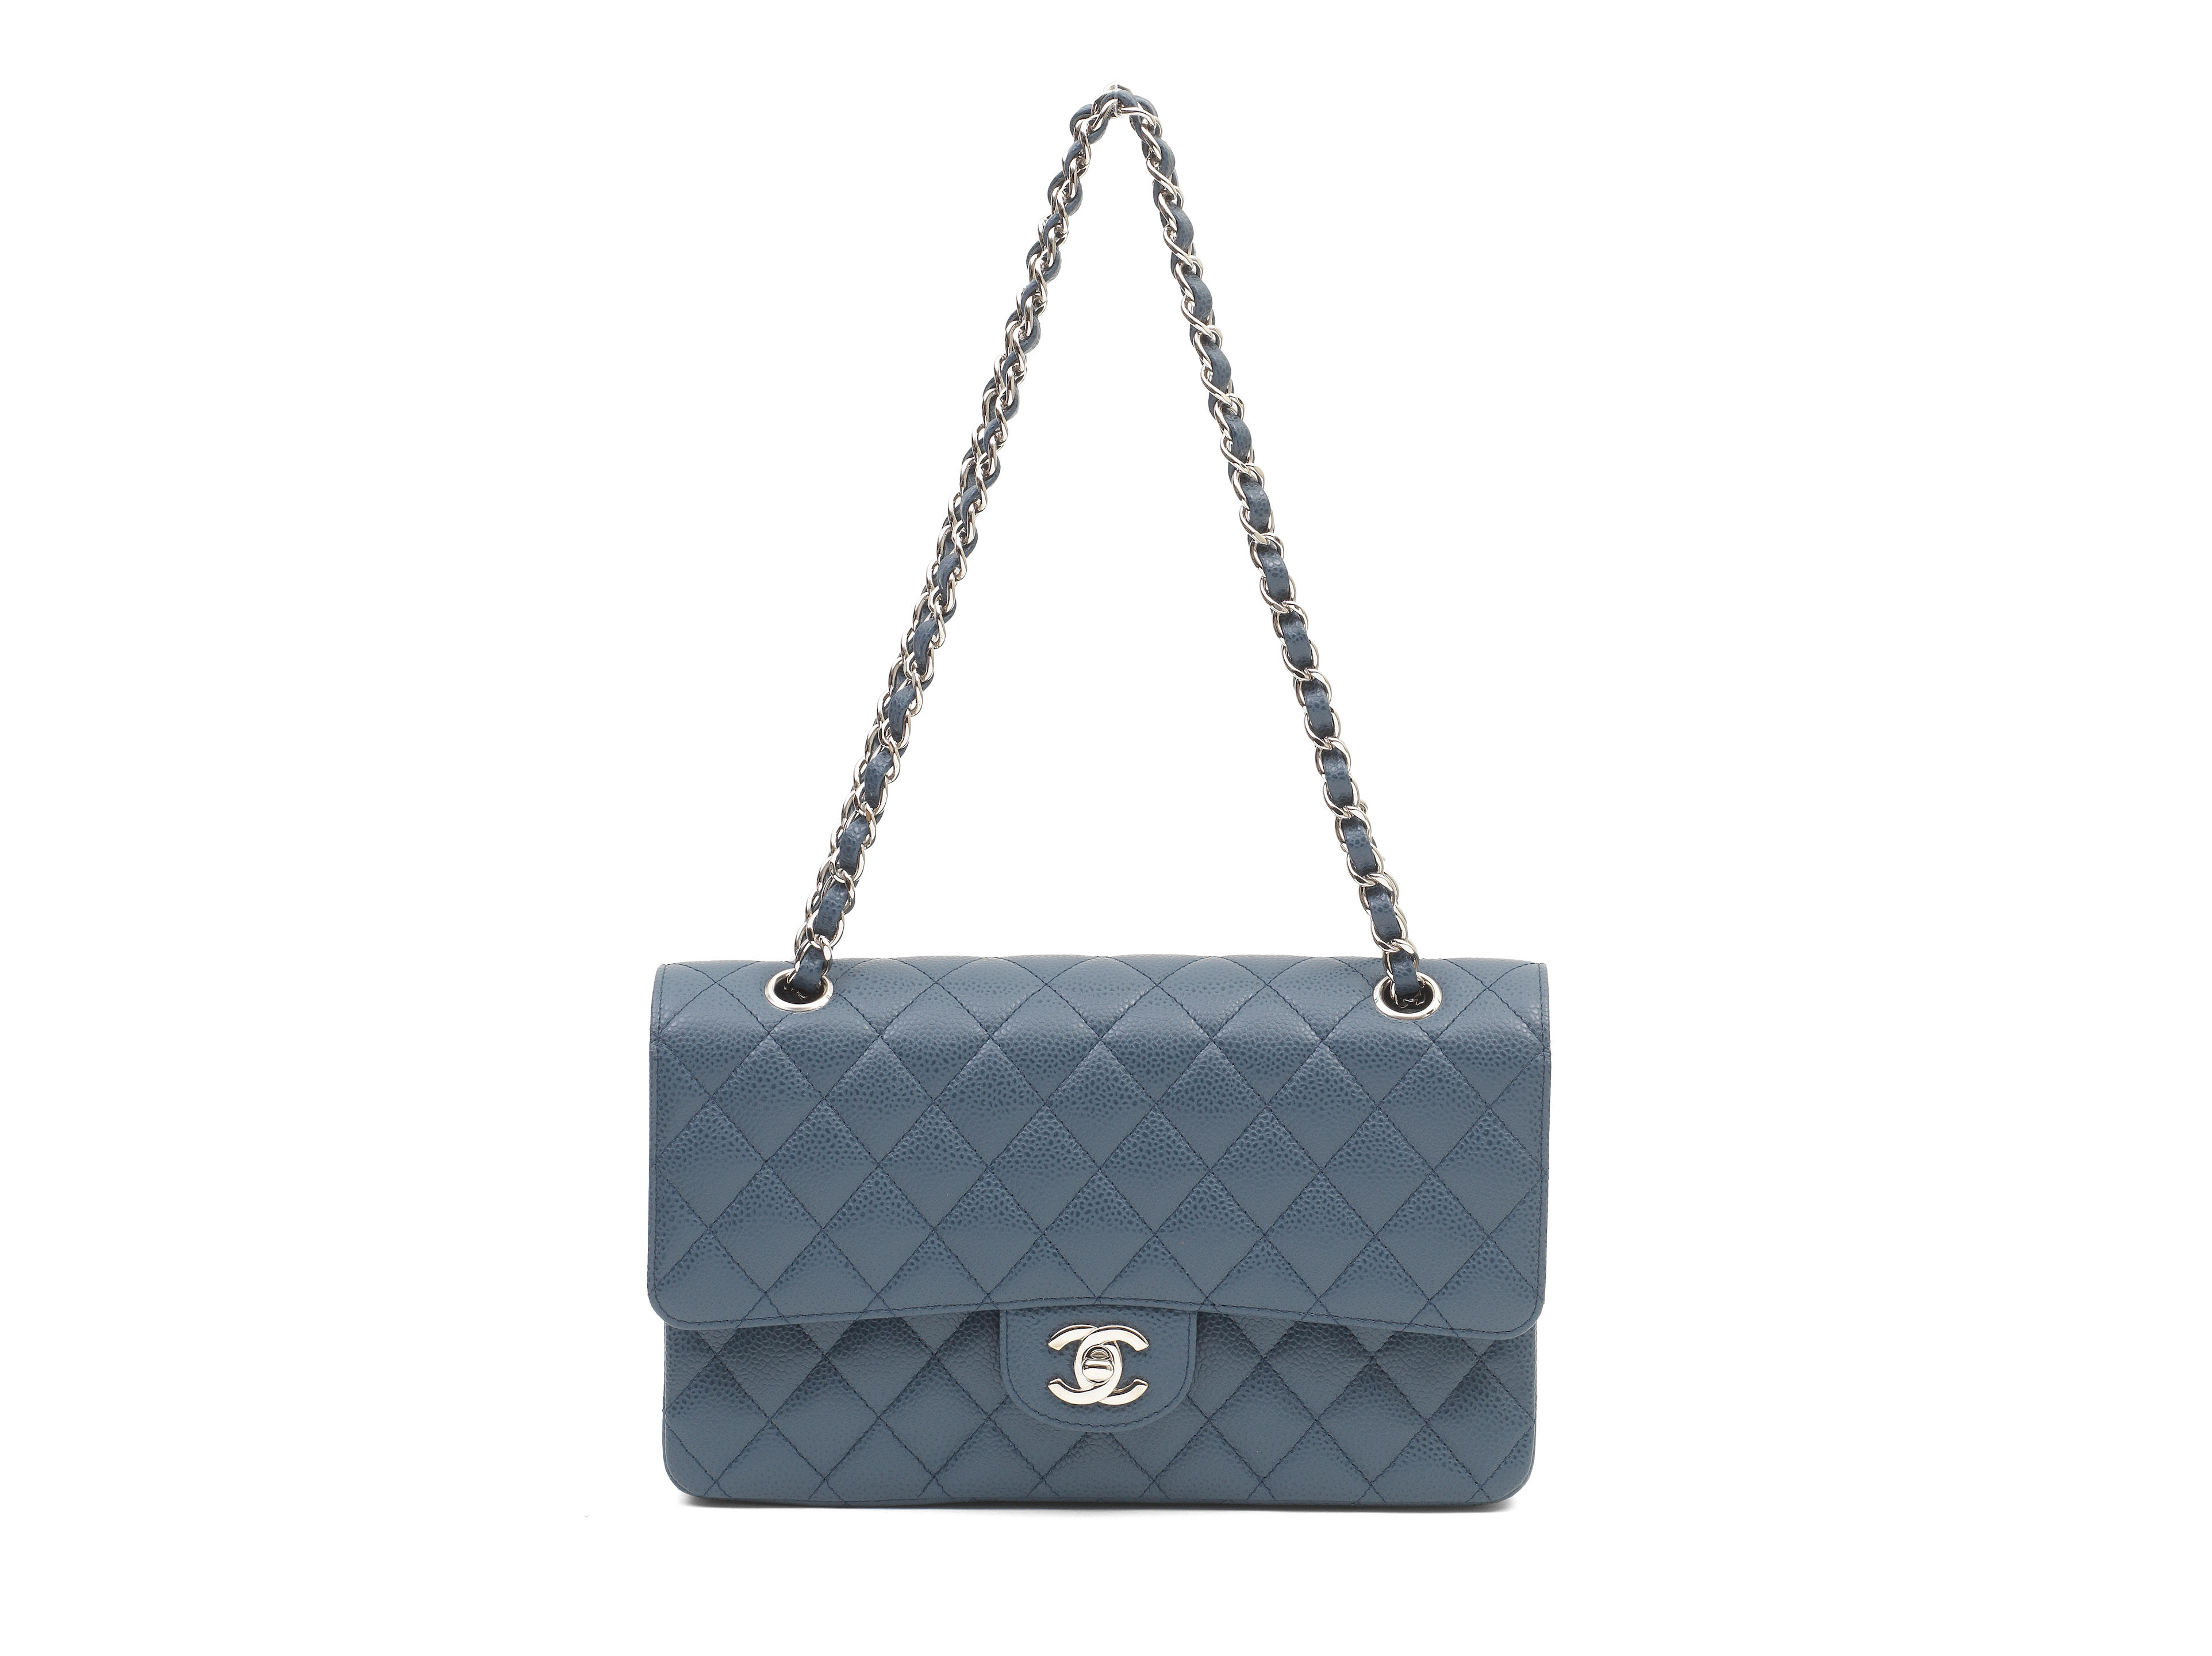 A BLUE JEAN CAVIAR MEDIUM CLASSIC DOUBLE FLAP BAG Chanel, 2005-2006 (includes serial sticker, authenticity card, leather booklet, dust bag and box)